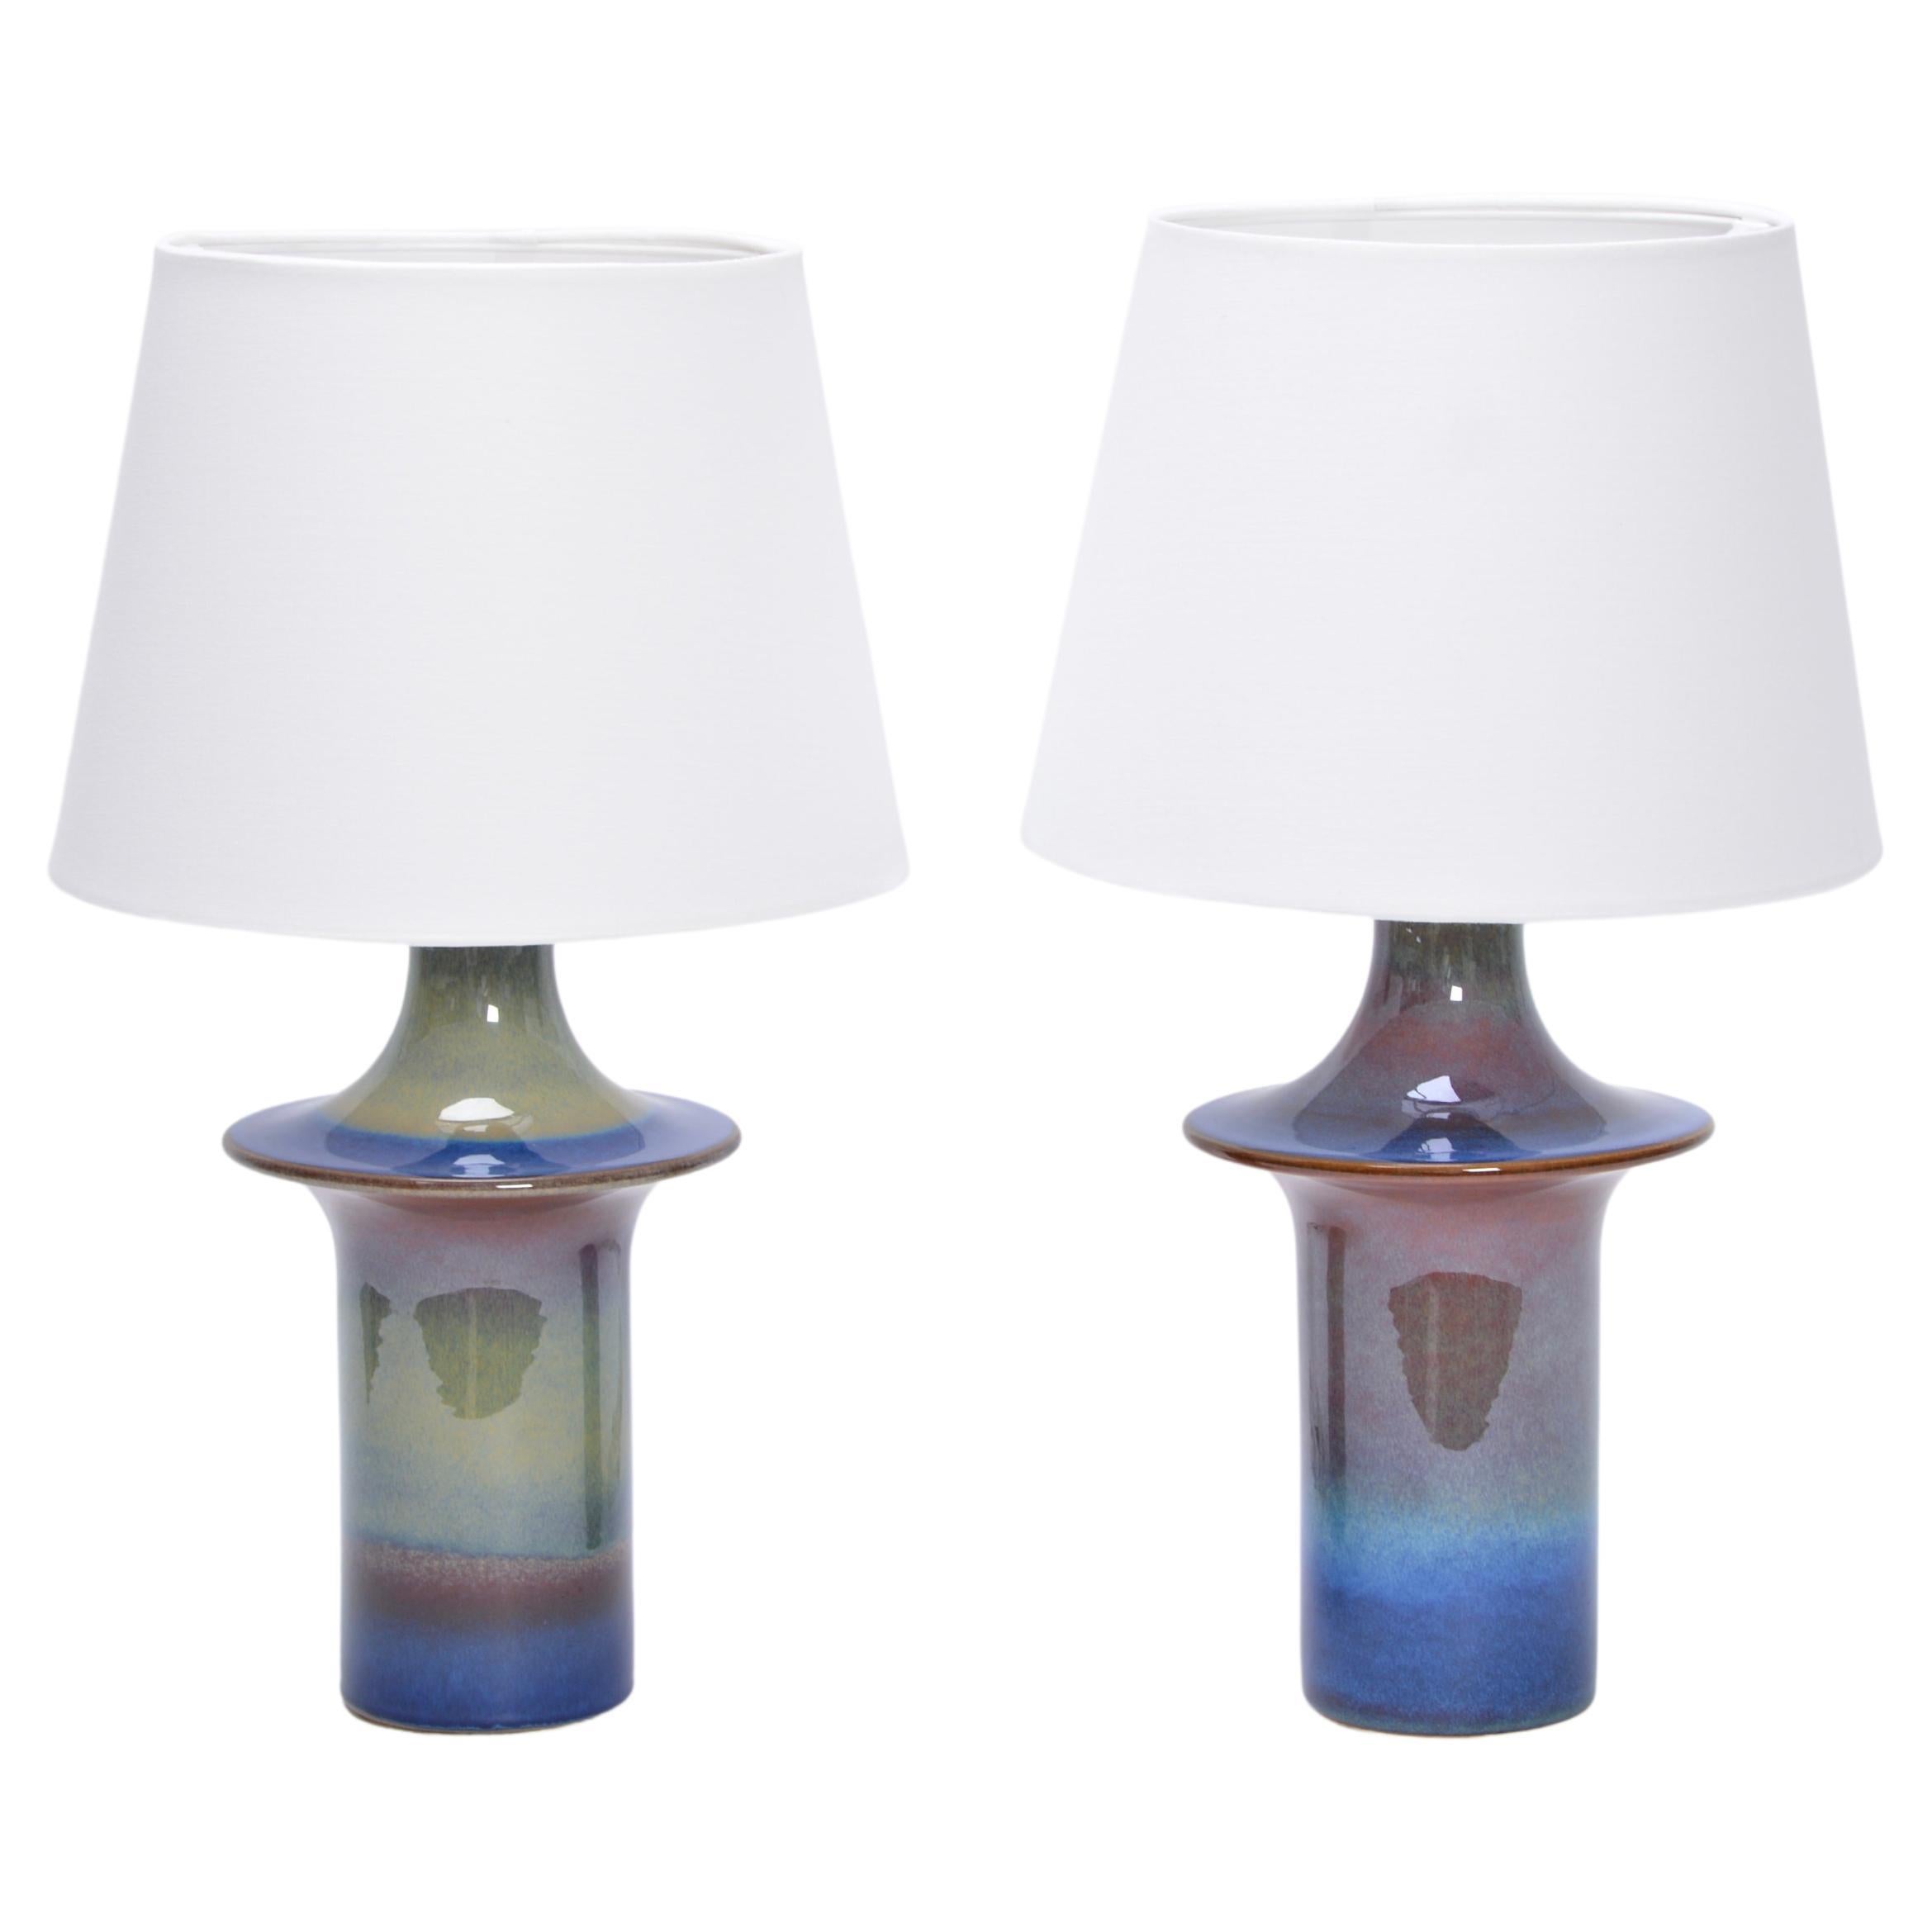 Pair of Tall Blue Danish Mid-Century Modern Table Lamps by Soholm Model 1070